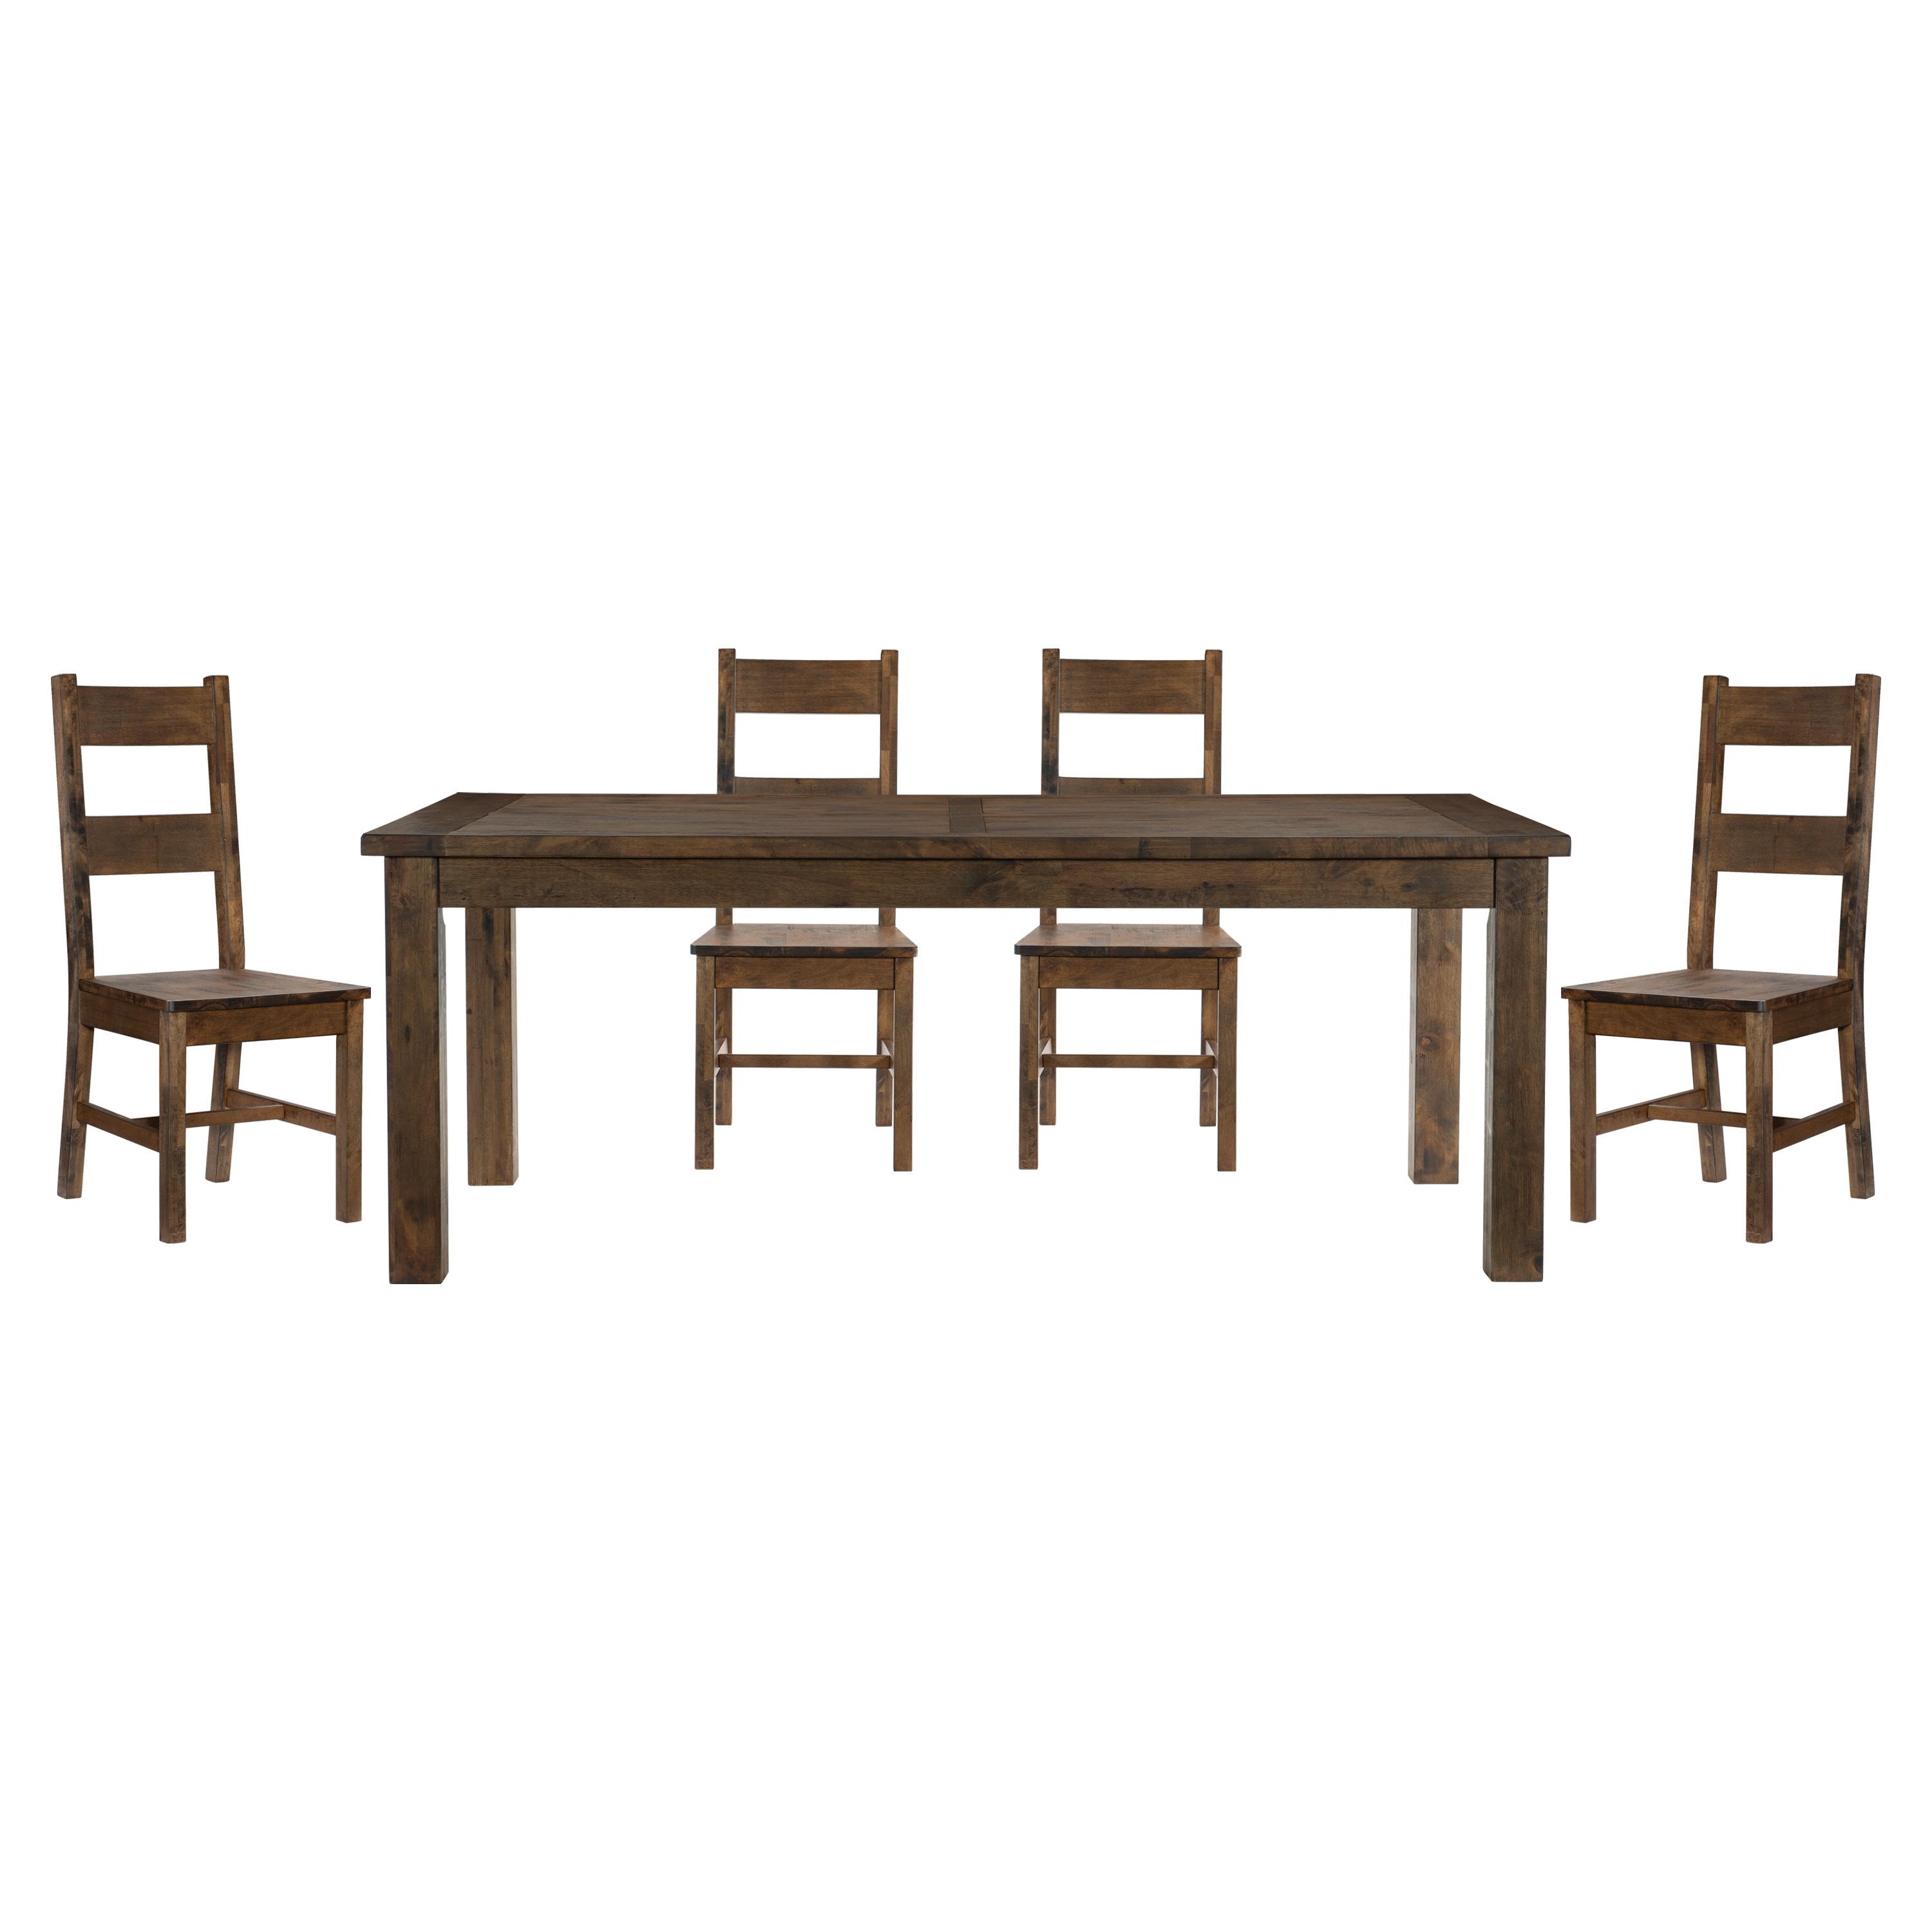 Classic Dining Room Set 1957-79-5PC Jerrick 1957-79-5PC in Brown 